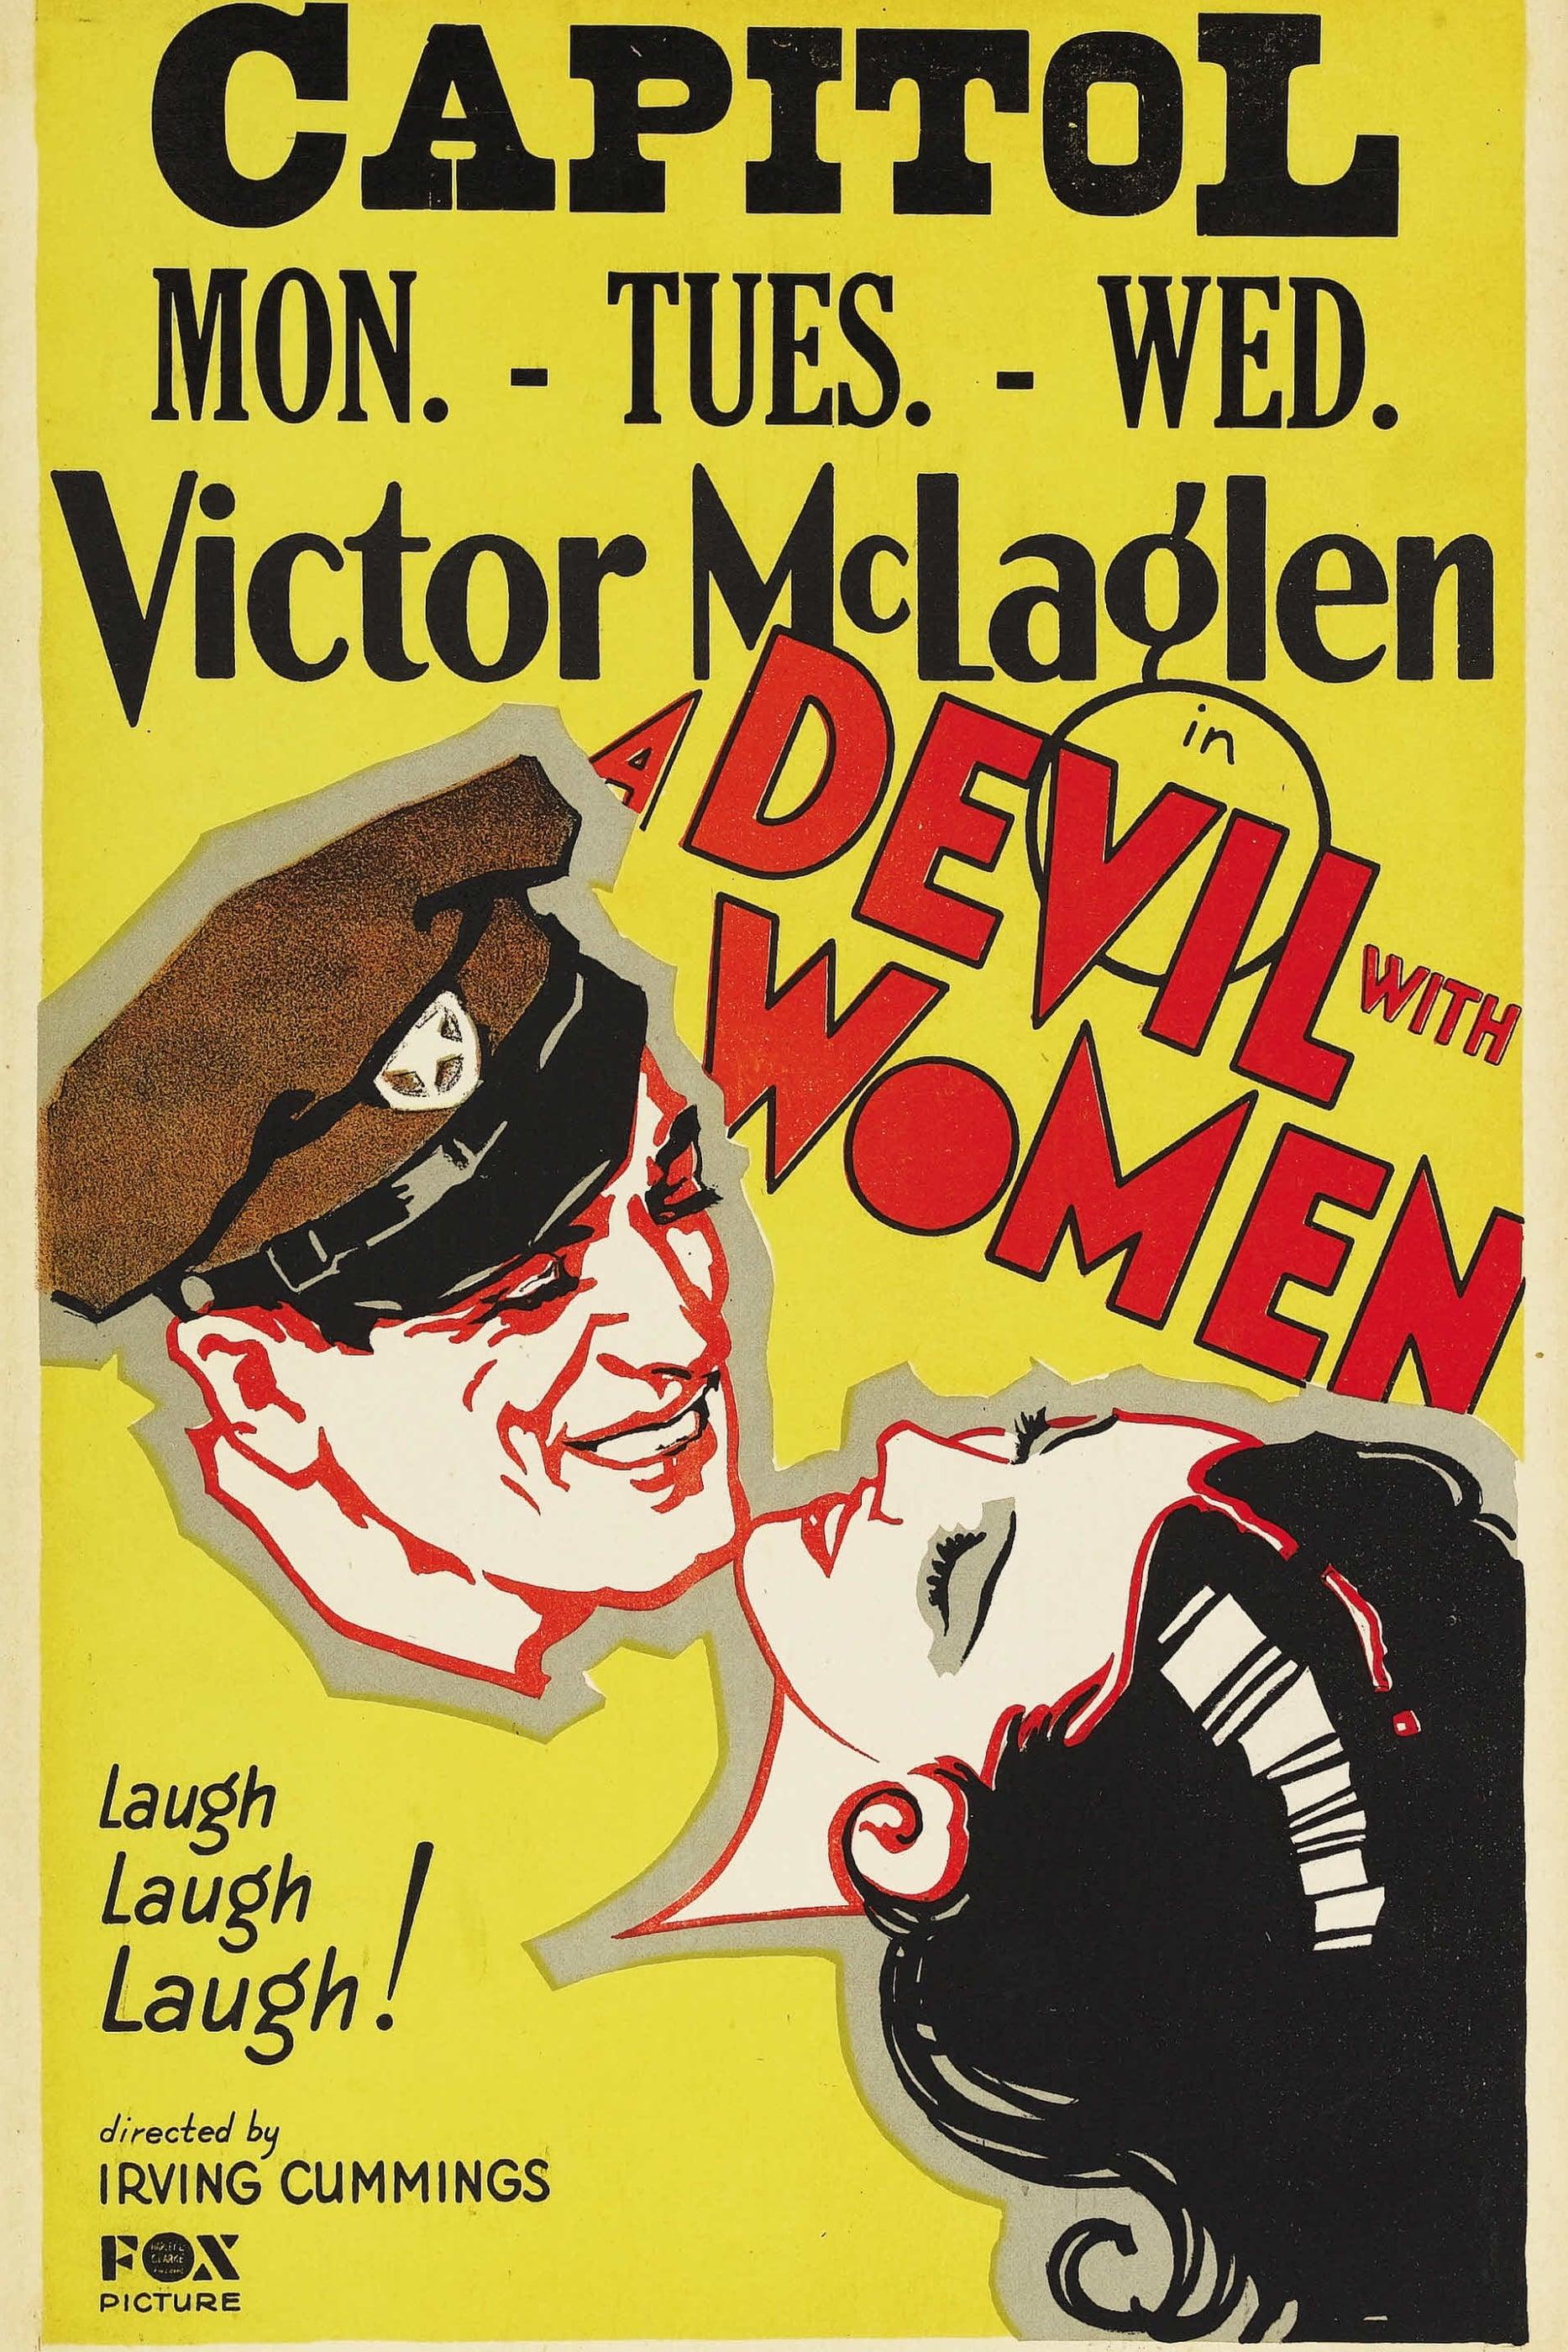 A Devil with Women poster